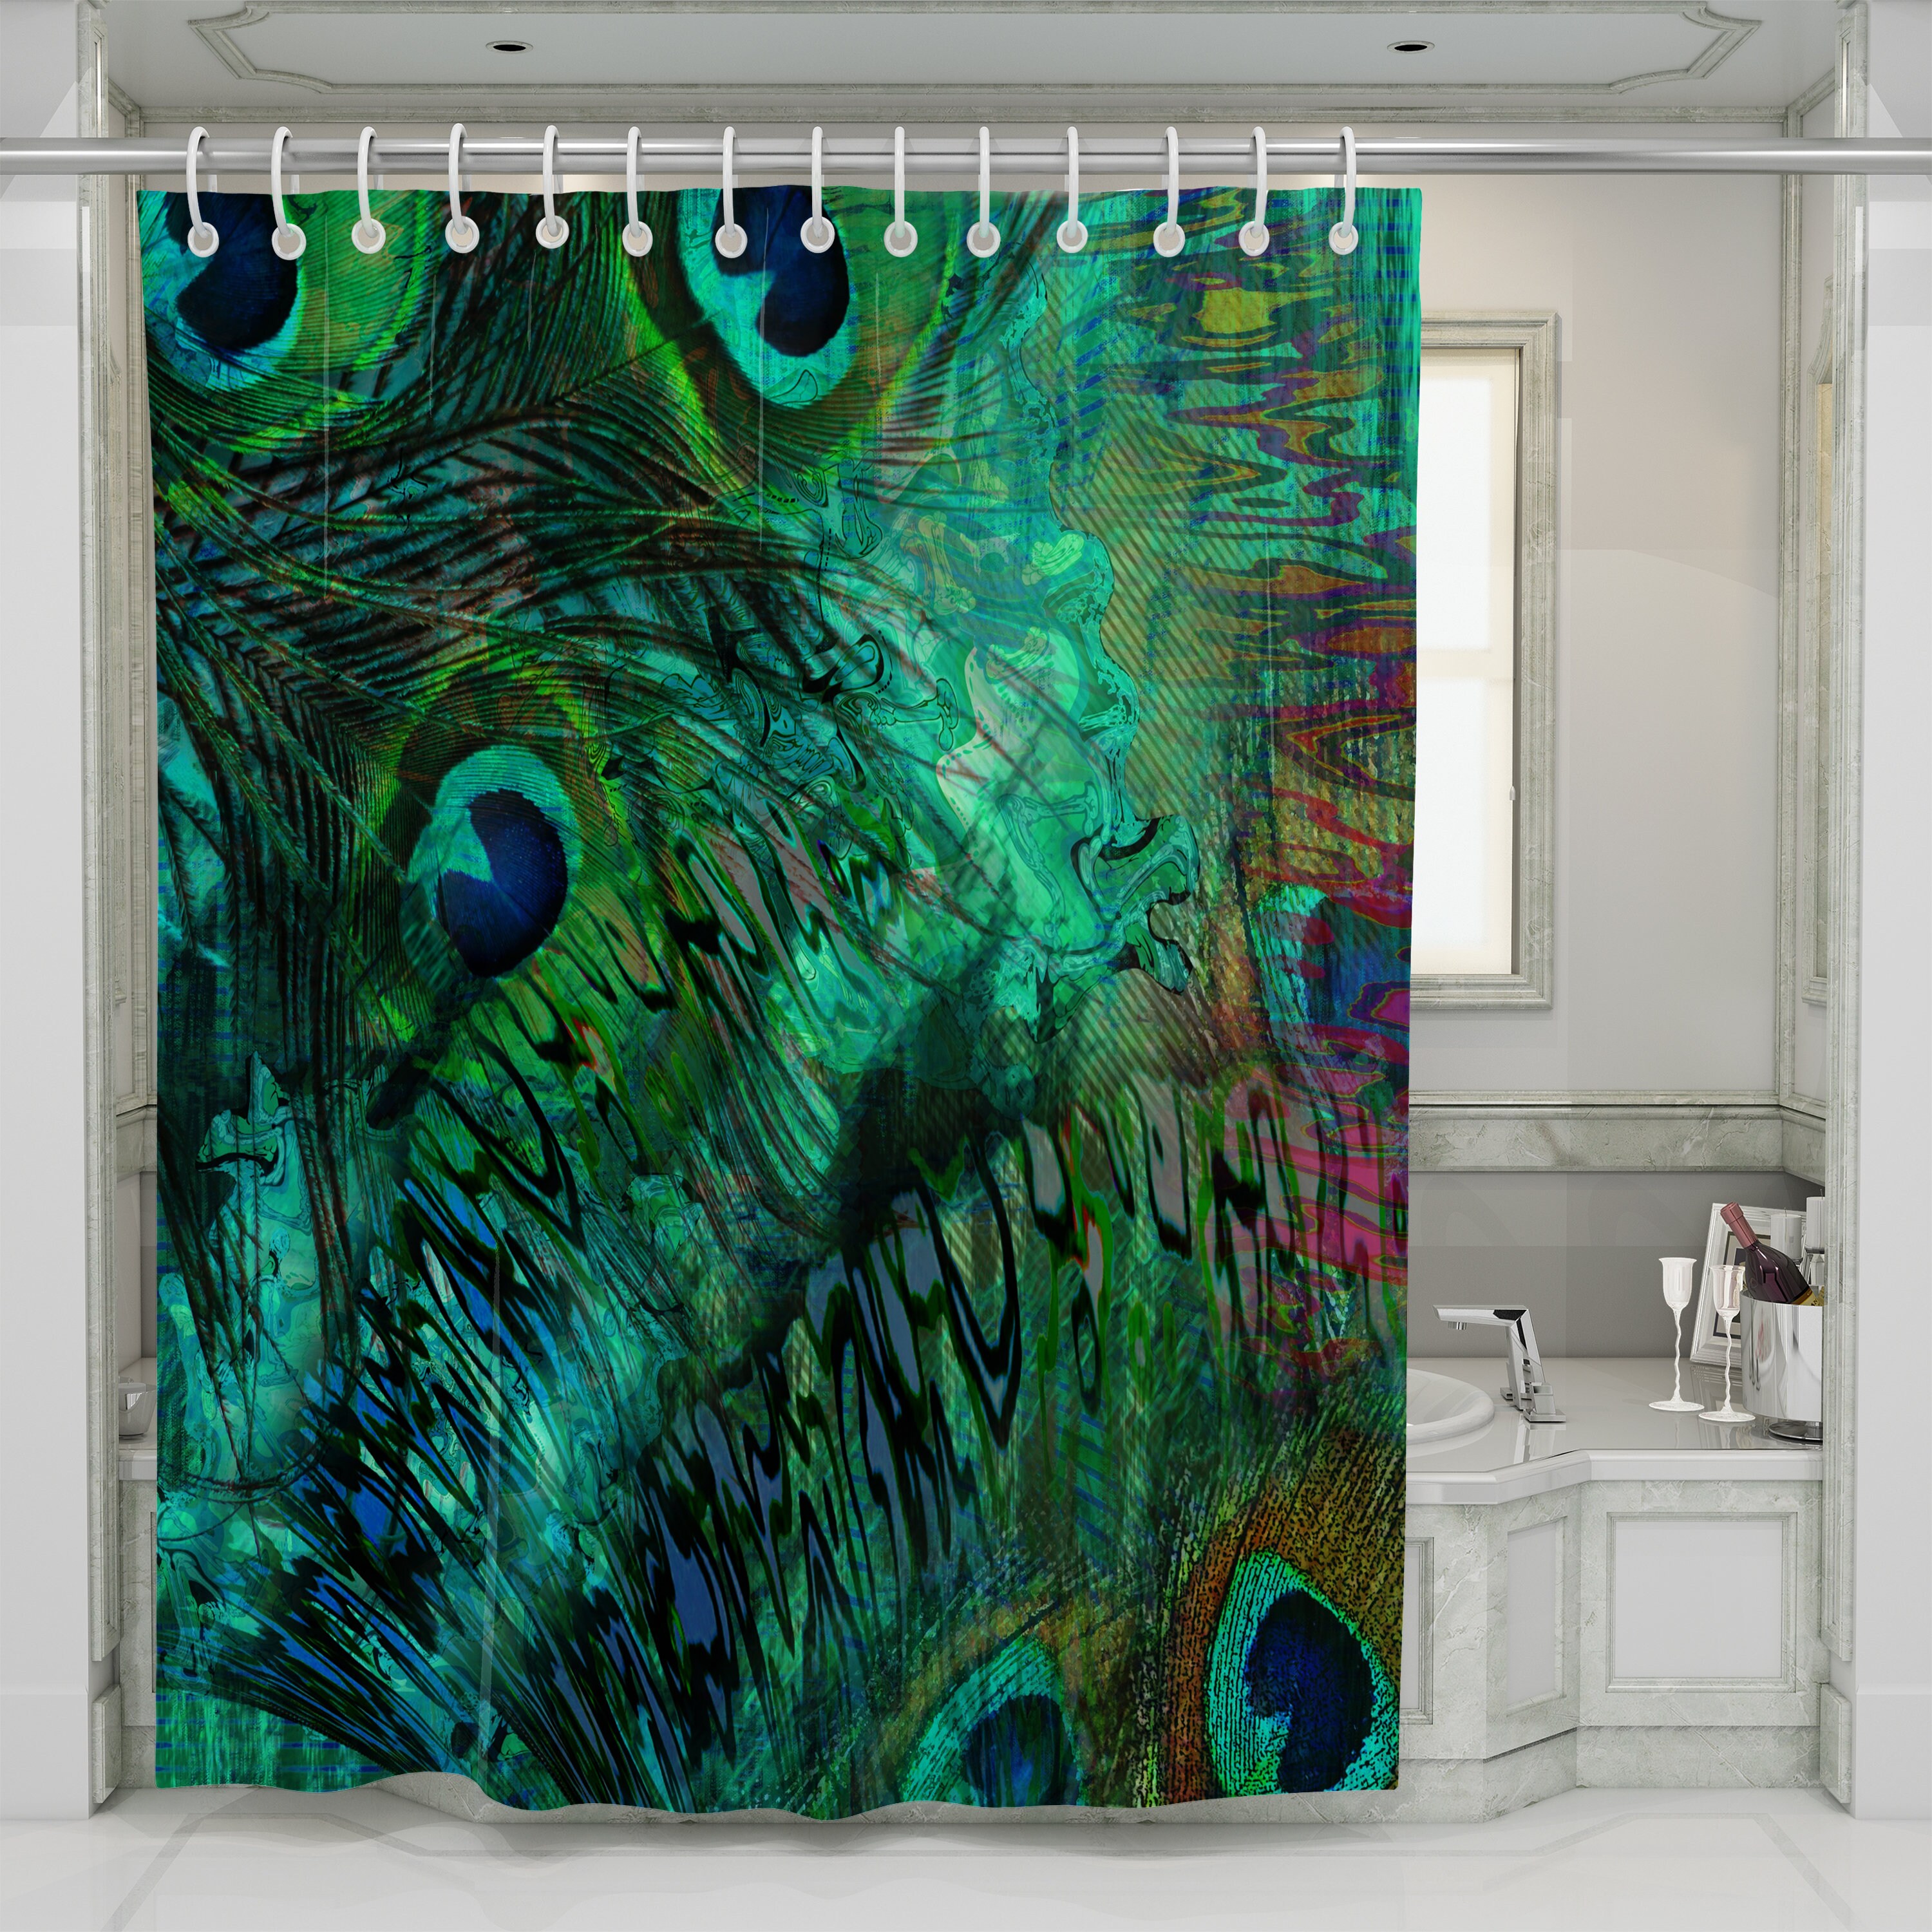 Details about   Spring Shower Curtain Wild Peacock Feather Print for Bathroom 